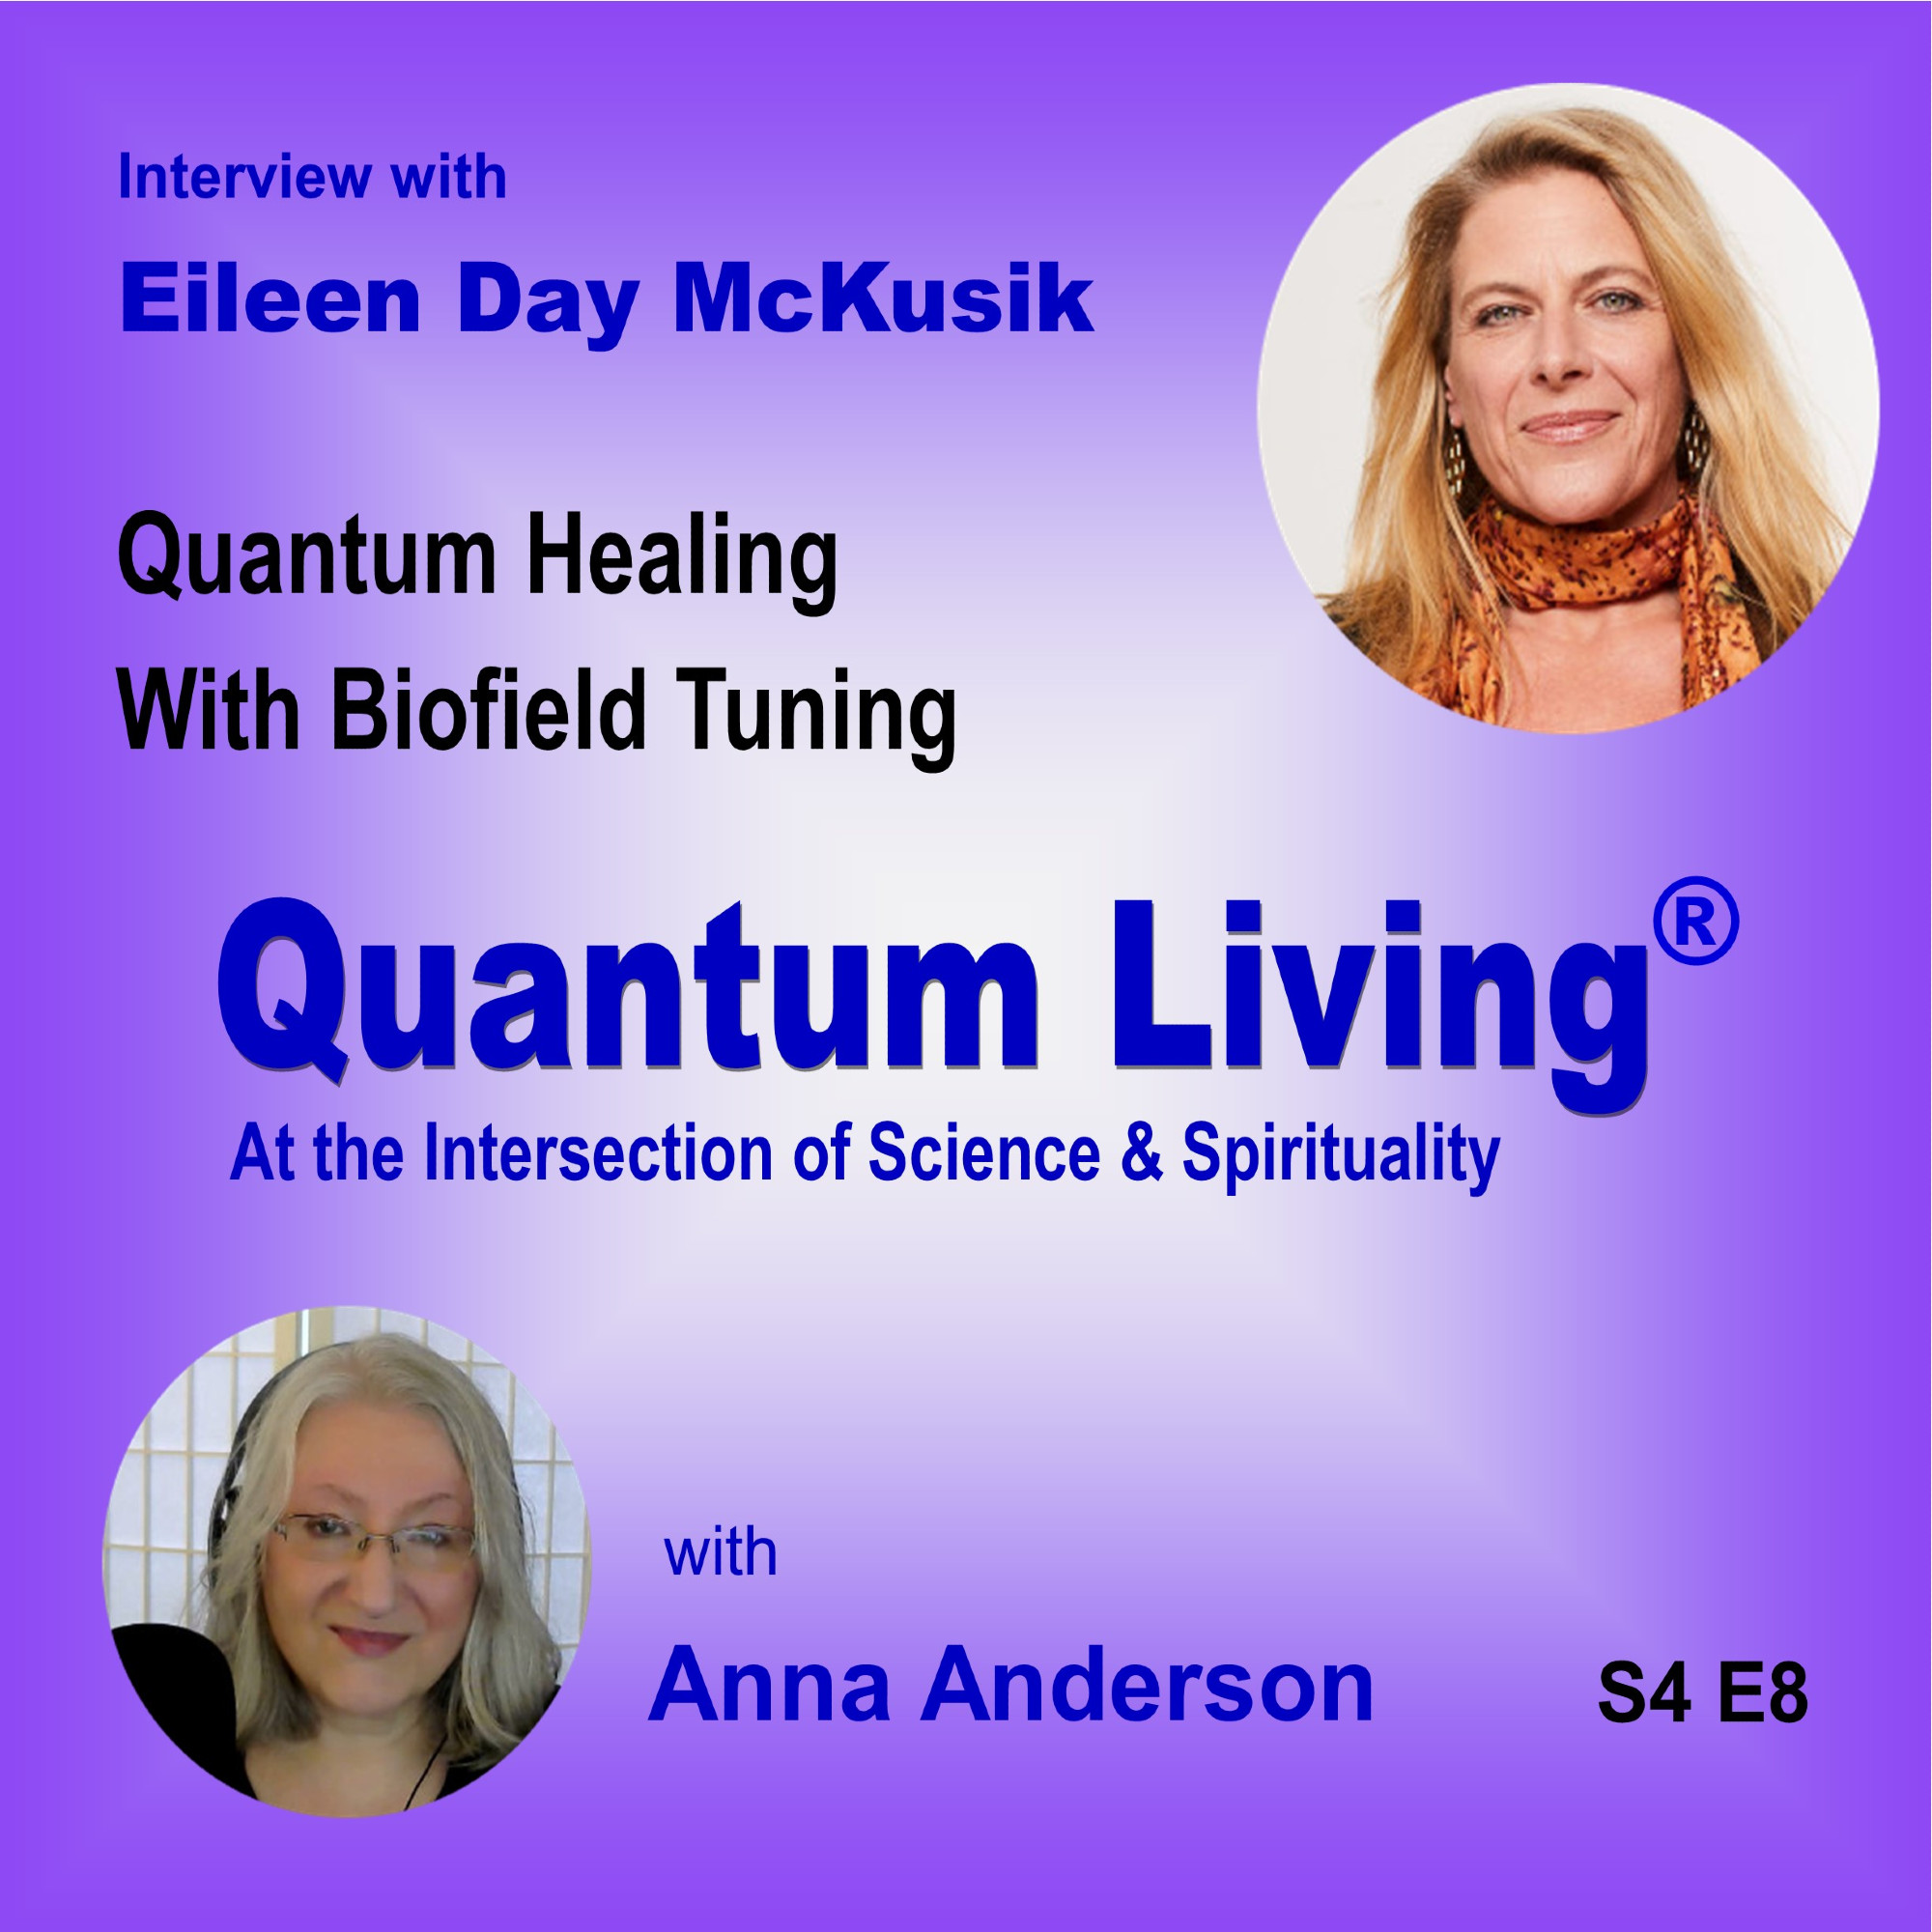 S4 E8: Quantum Healing With Biofield Tuning Image